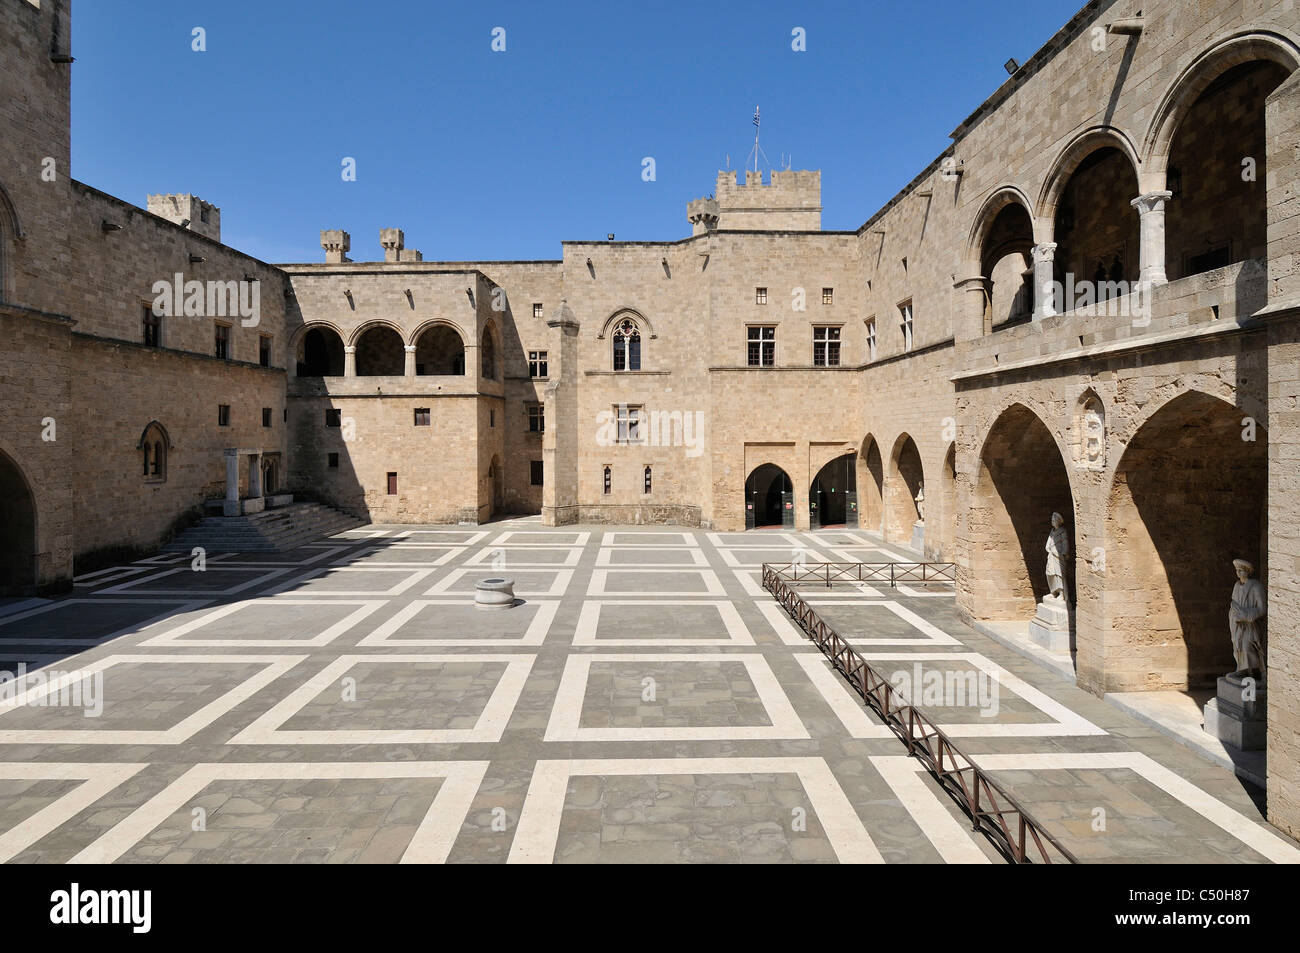 Rhodes. Dodecanese Islands. Greece. Courtyard of the Palace of Grand Masters, Old Town, Rhodes City. Stock Photo